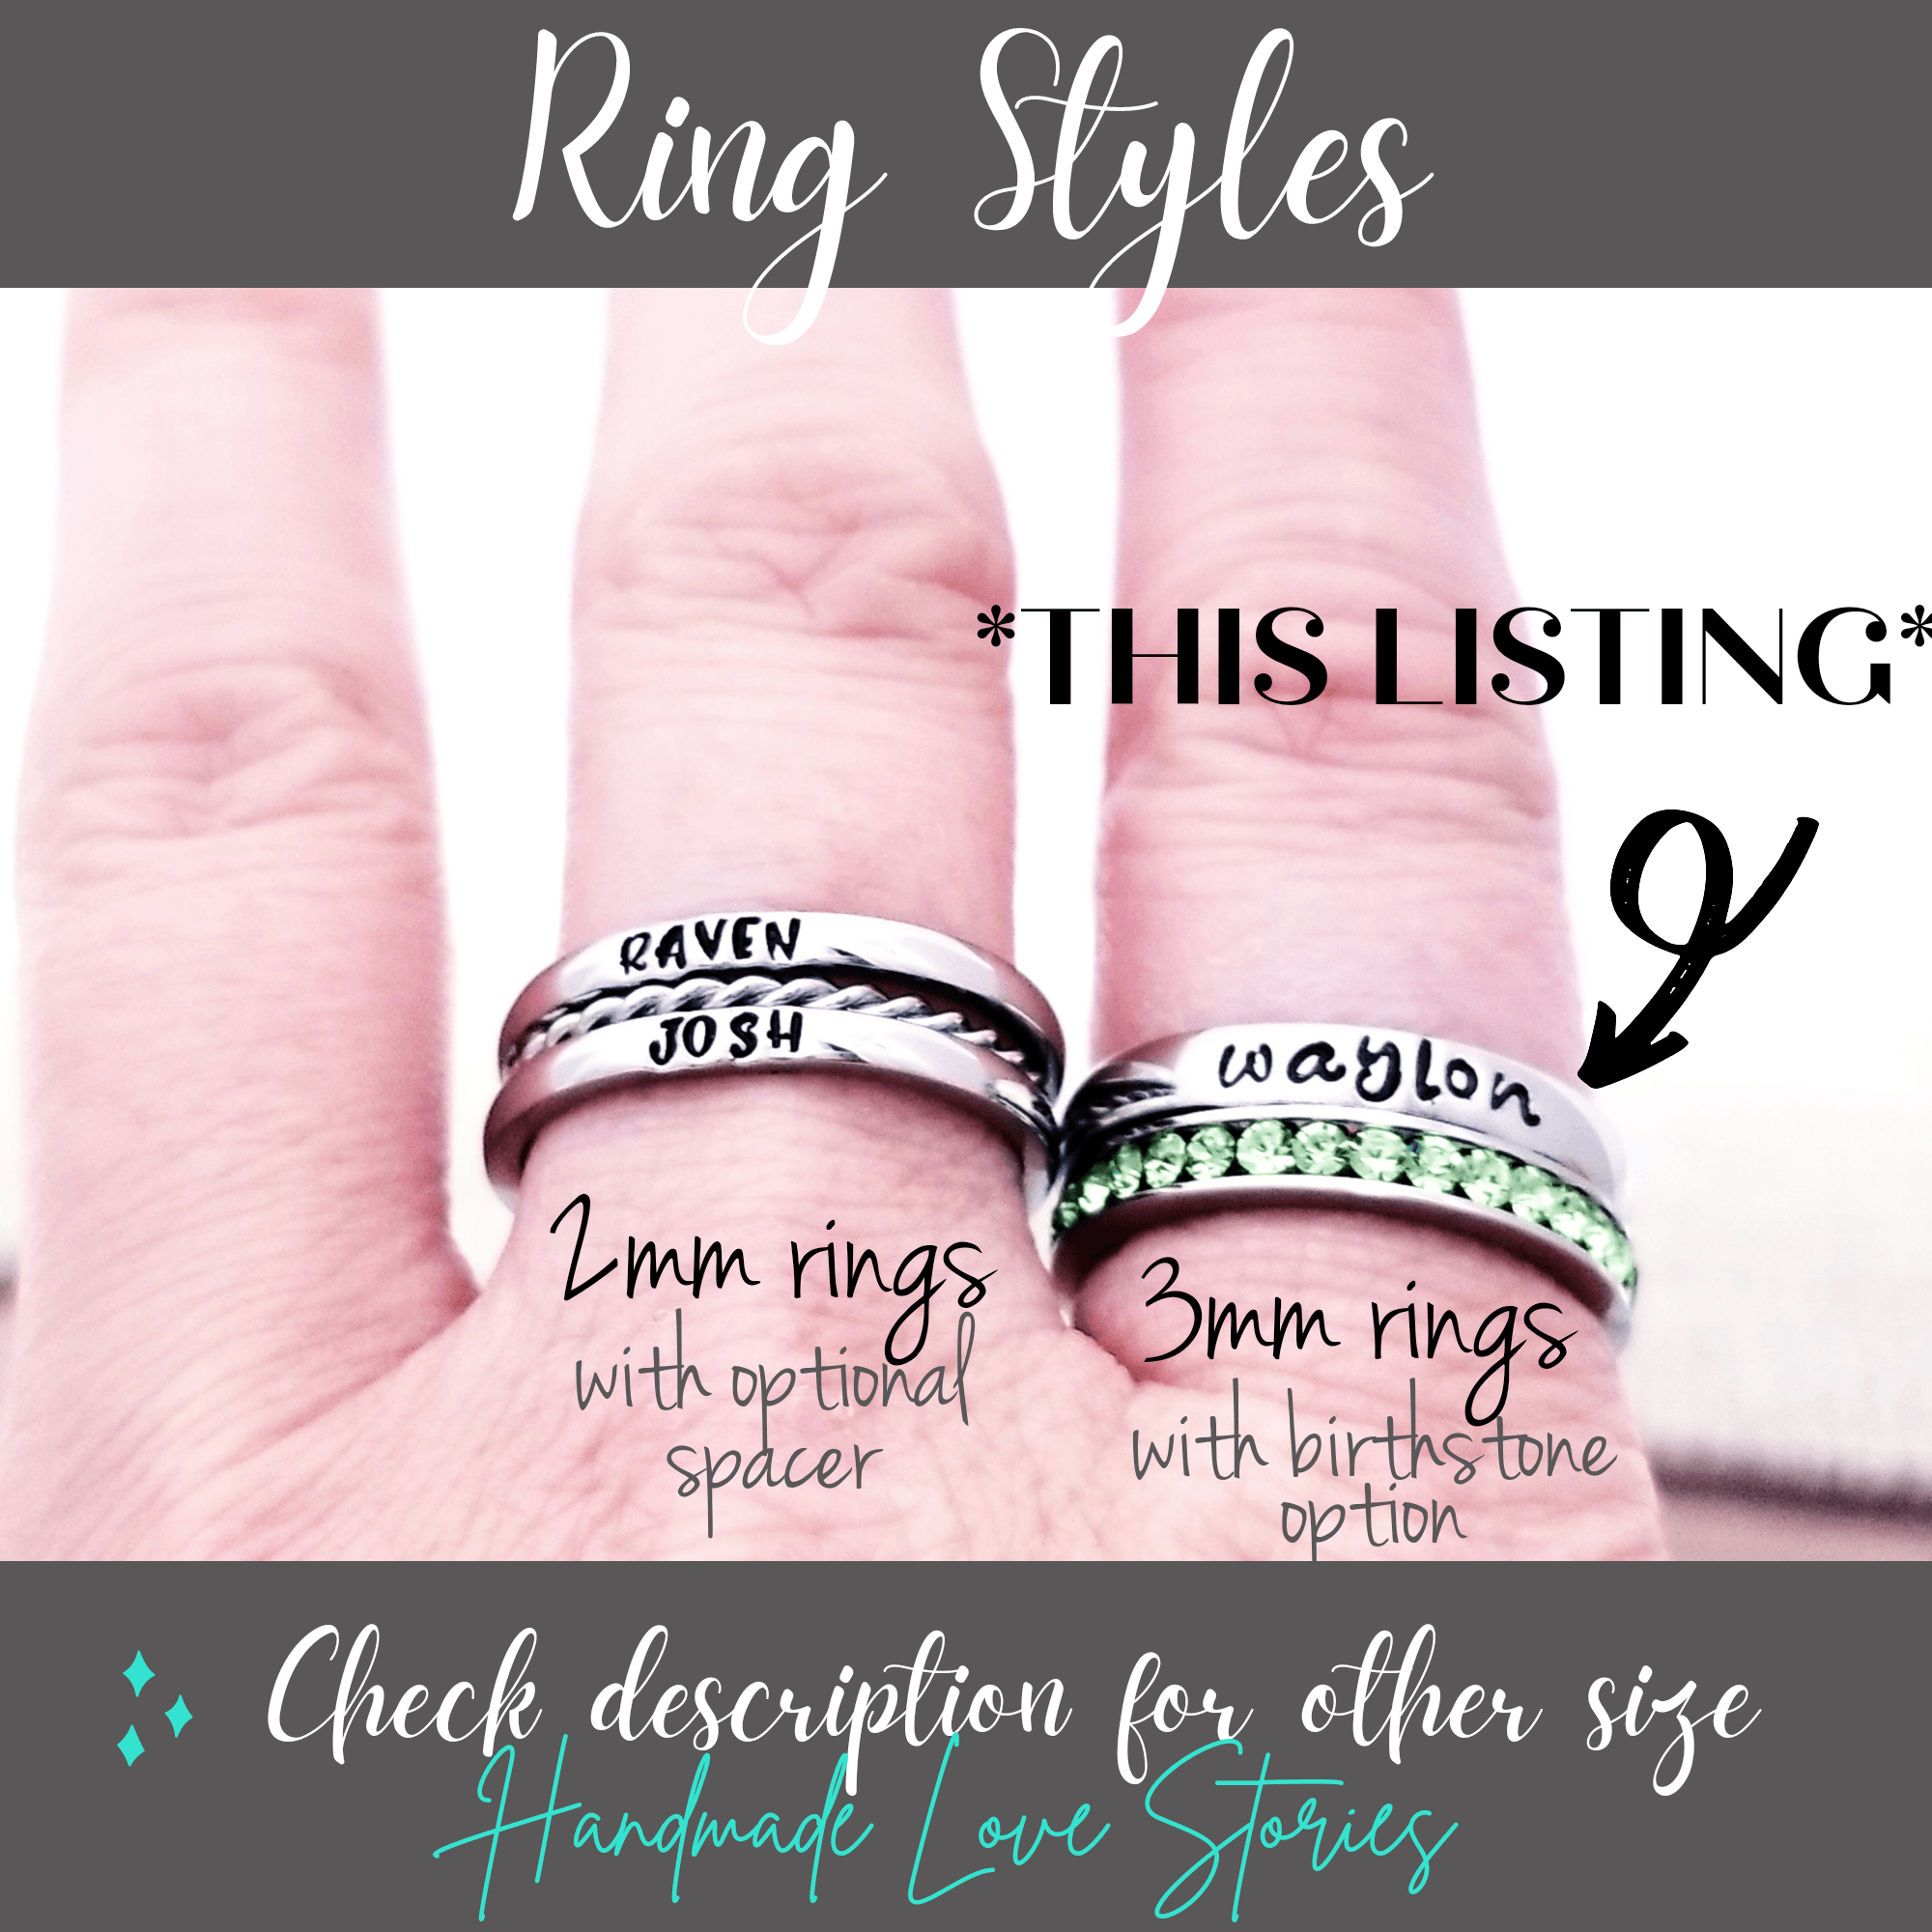 Stacking Name Rings, Custom Hand Stamped Rings, Personalized Gift, Eternity rings, Stainless Steel (Copy)